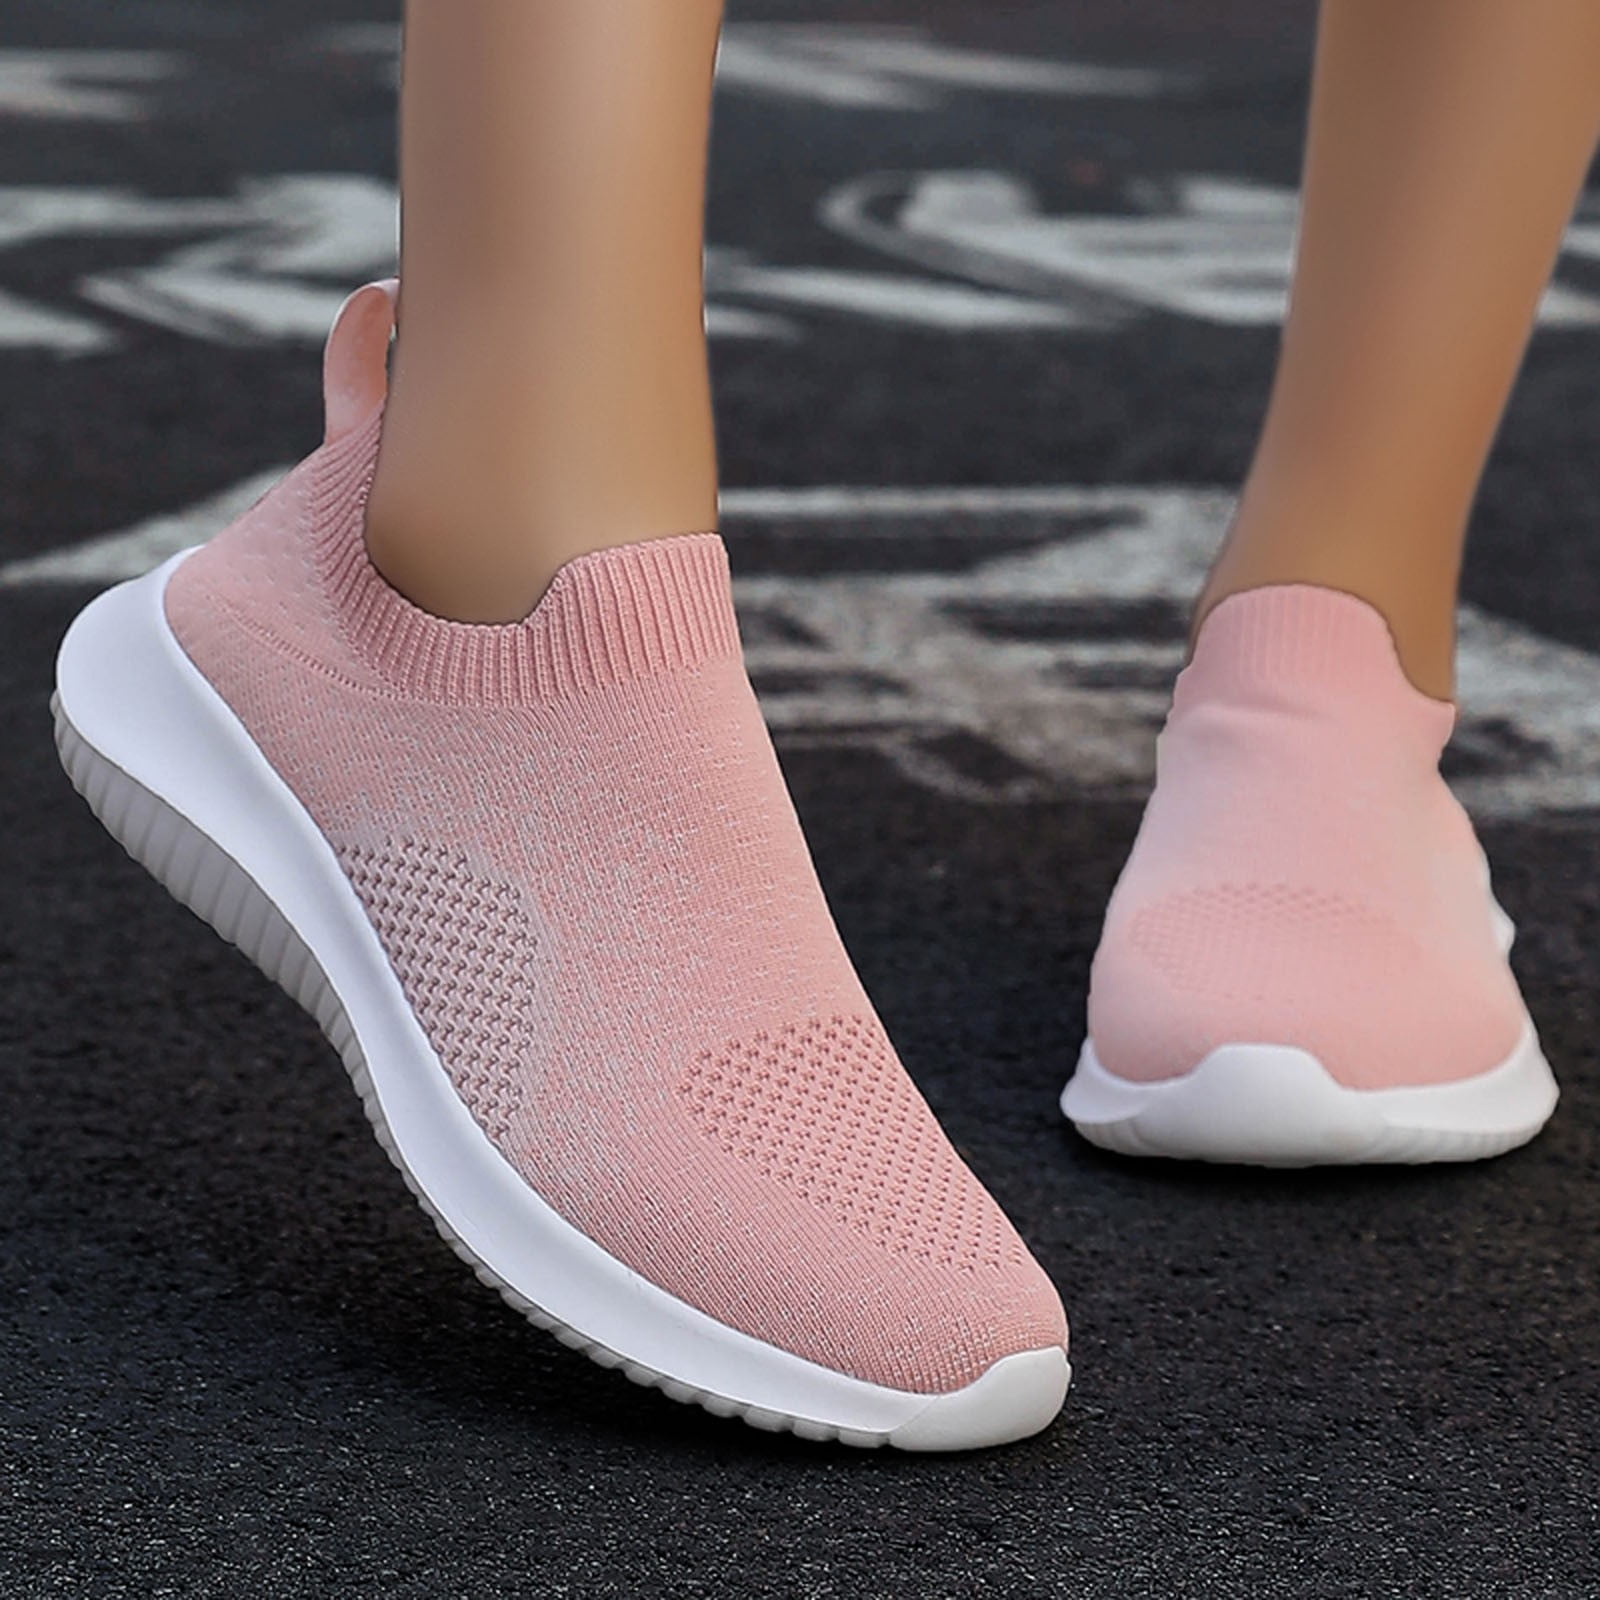 Sports Shoes Heel Lightweight Foot Casual Ladies Mesh Breathable Fashion Flat Women's High Top Light up Sneakers for Women Sneakers Women Ash Sneakers for Women Womens Sneakers -